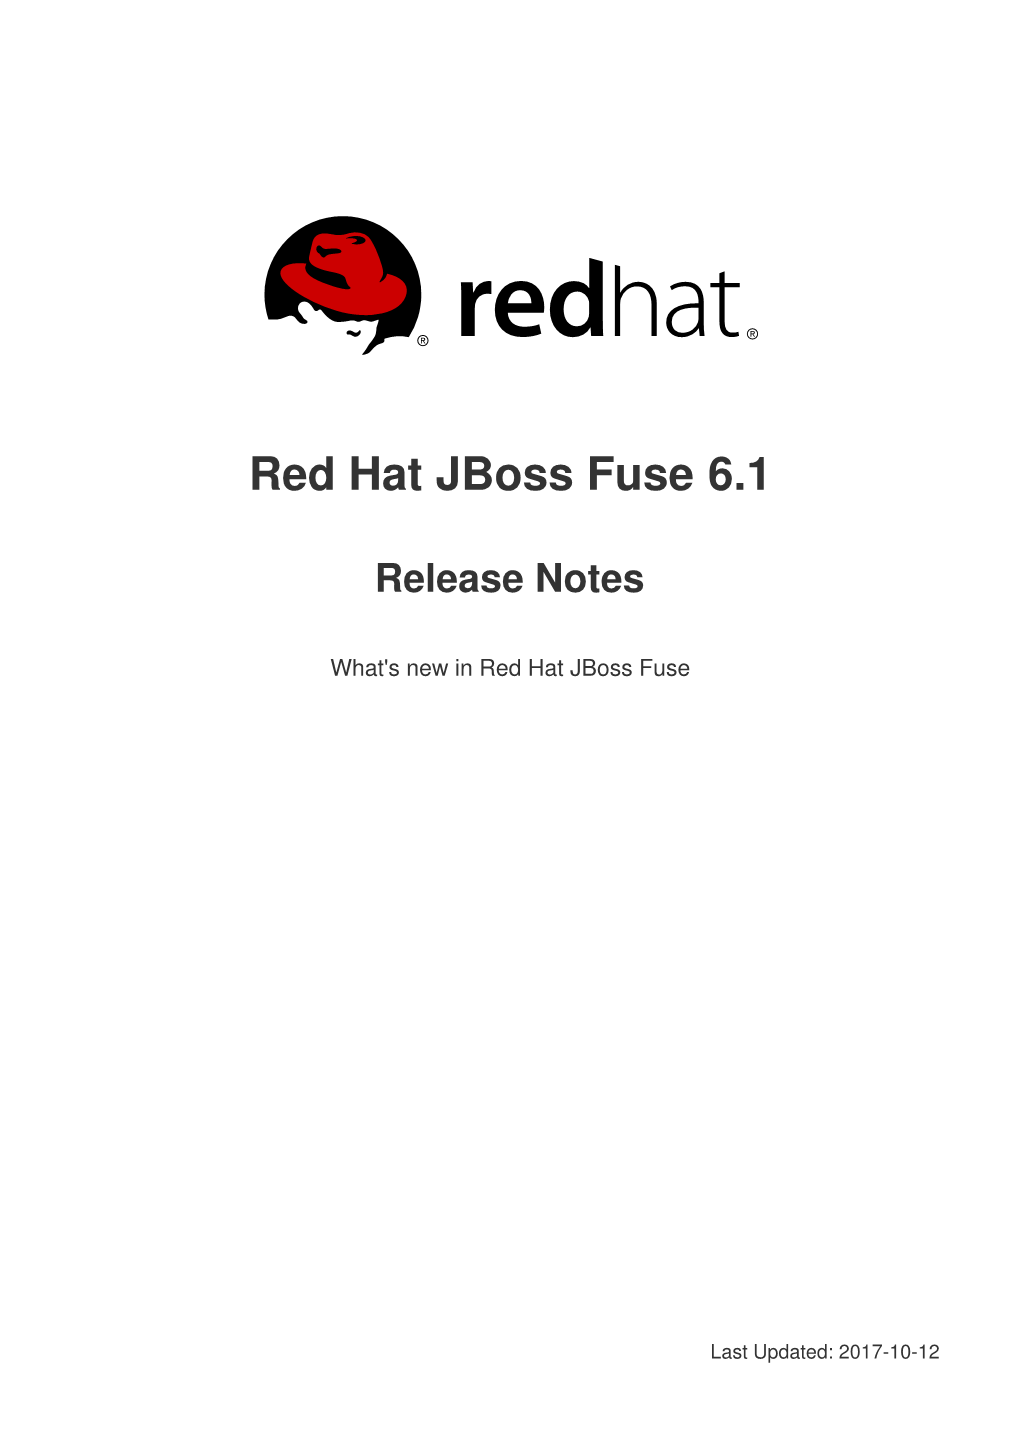 Red Hat Jboss Fuse 6.1 Release Notes